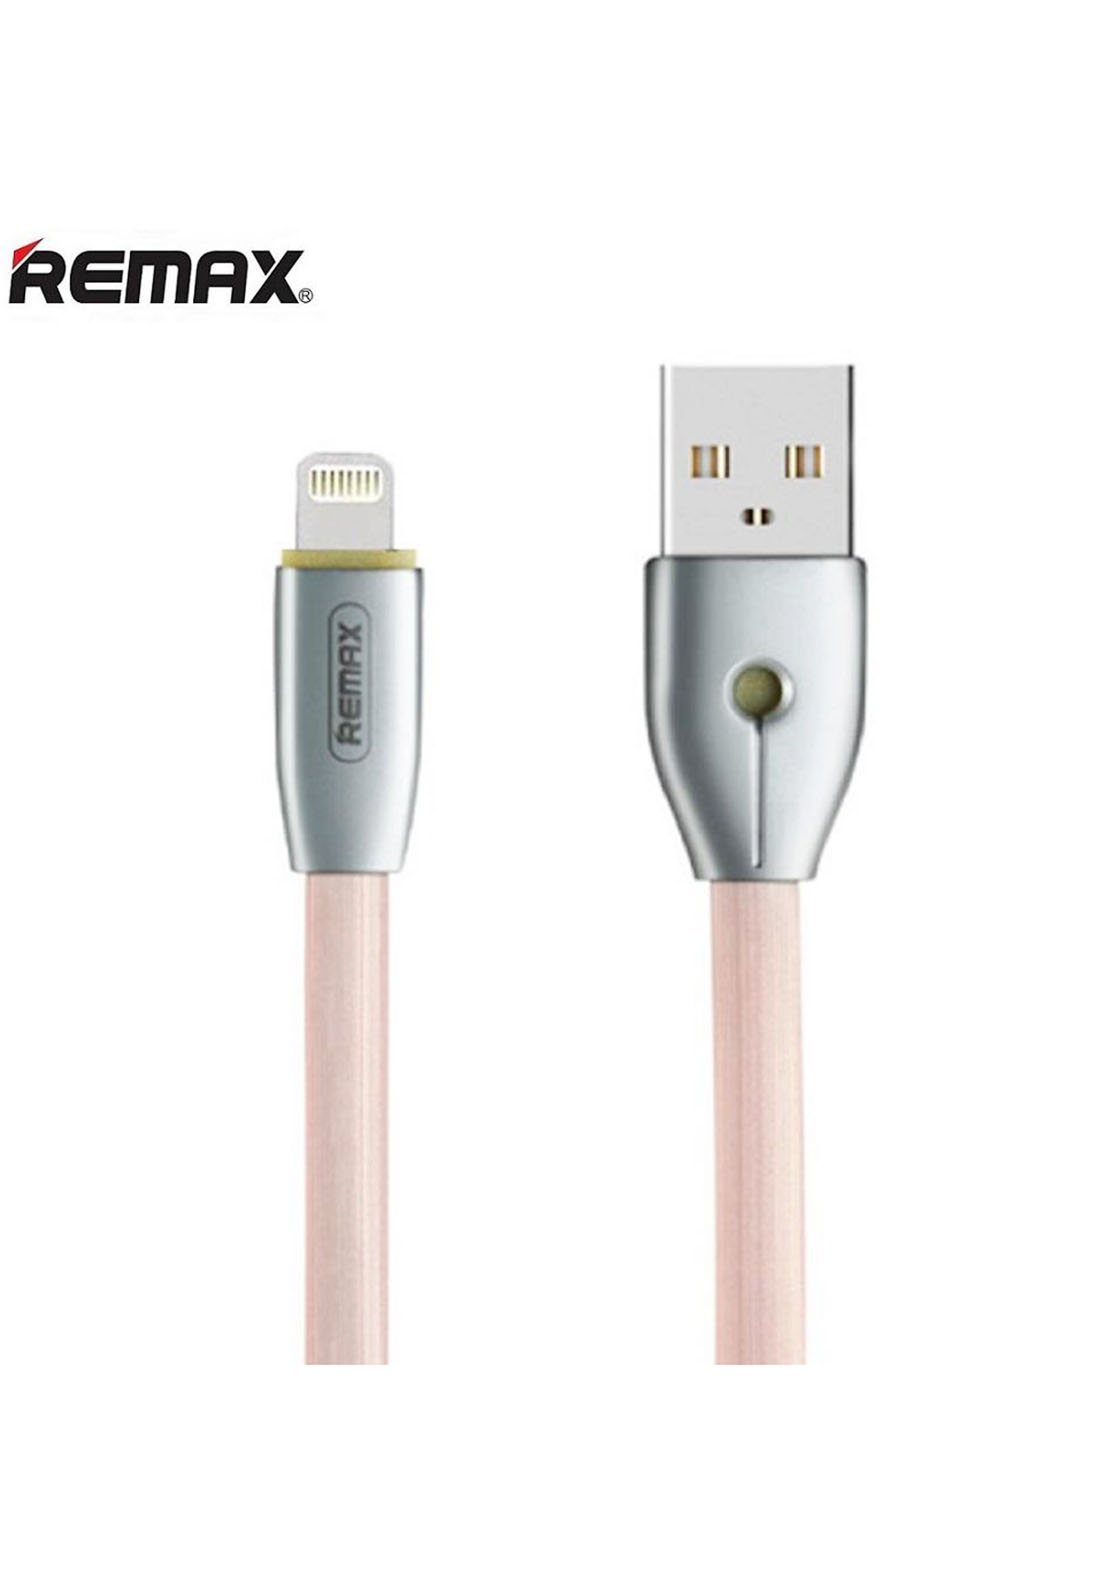 CABLE CHARGEUR iPhone REMAX RC-124i